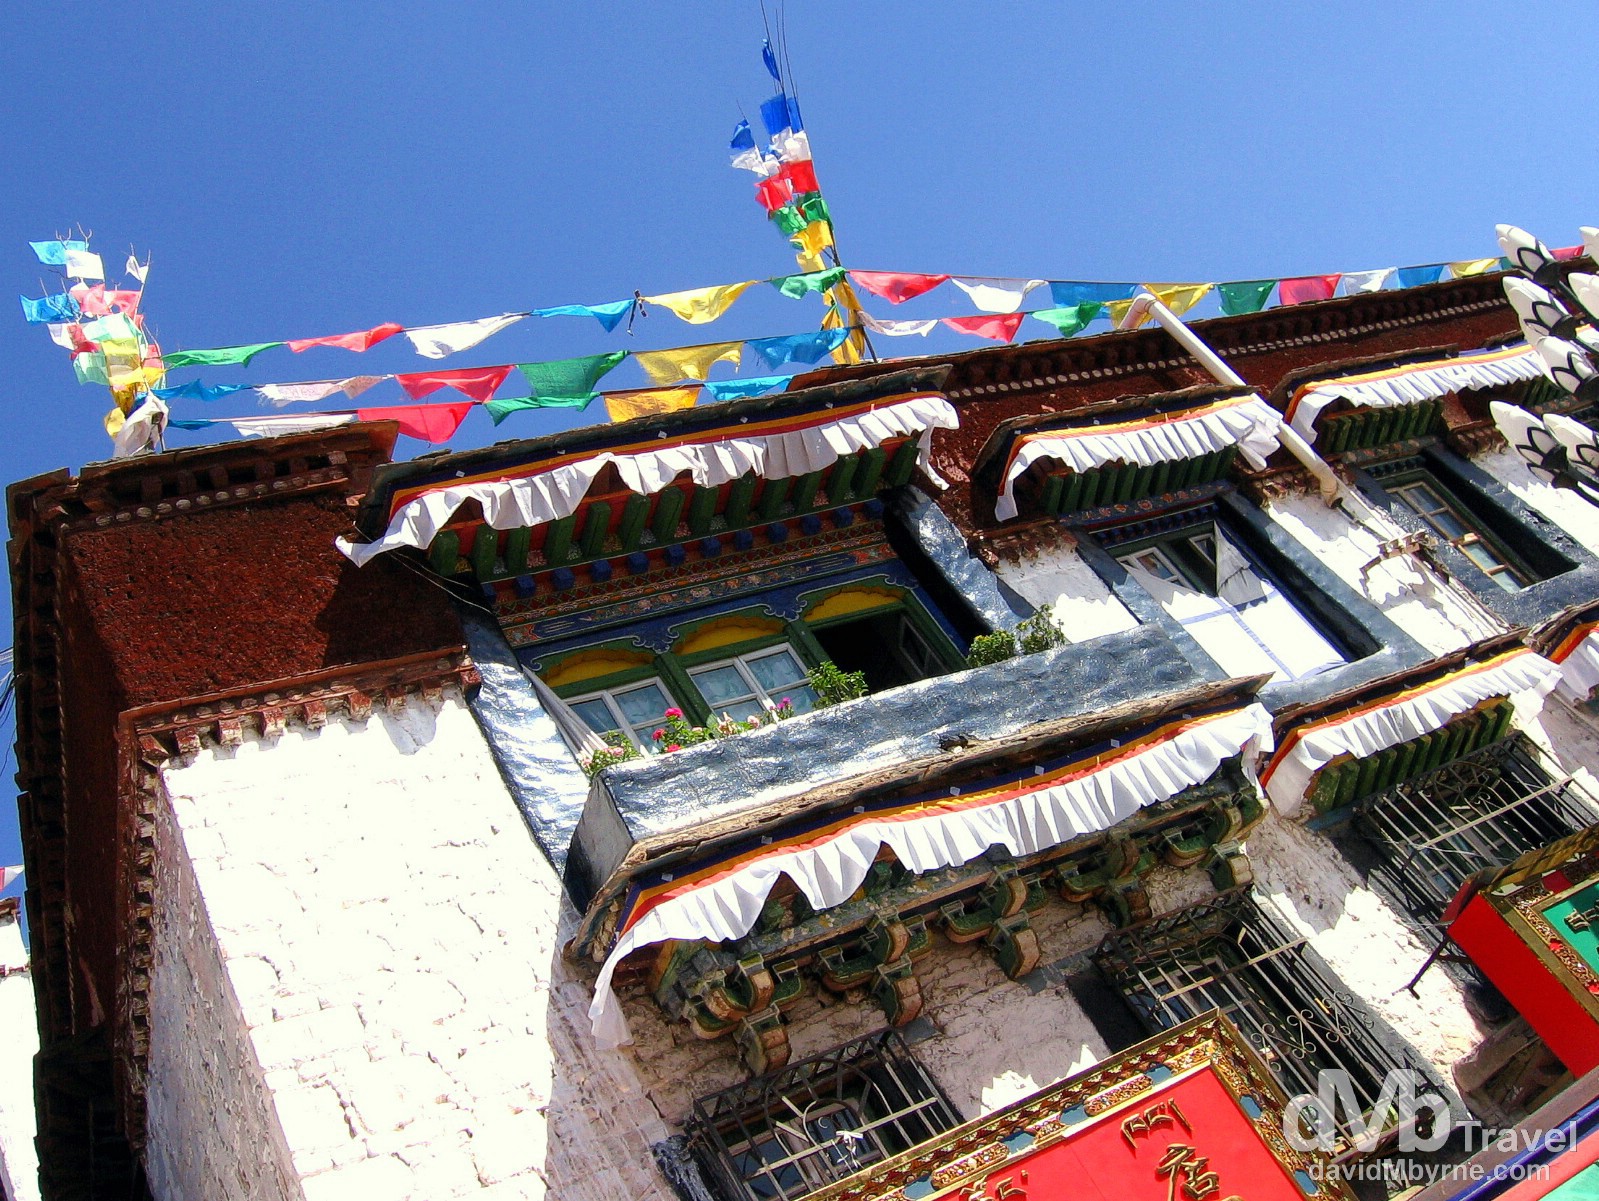 A building in Barkhor, Lhasa, Tibet. February 25th, 2008.